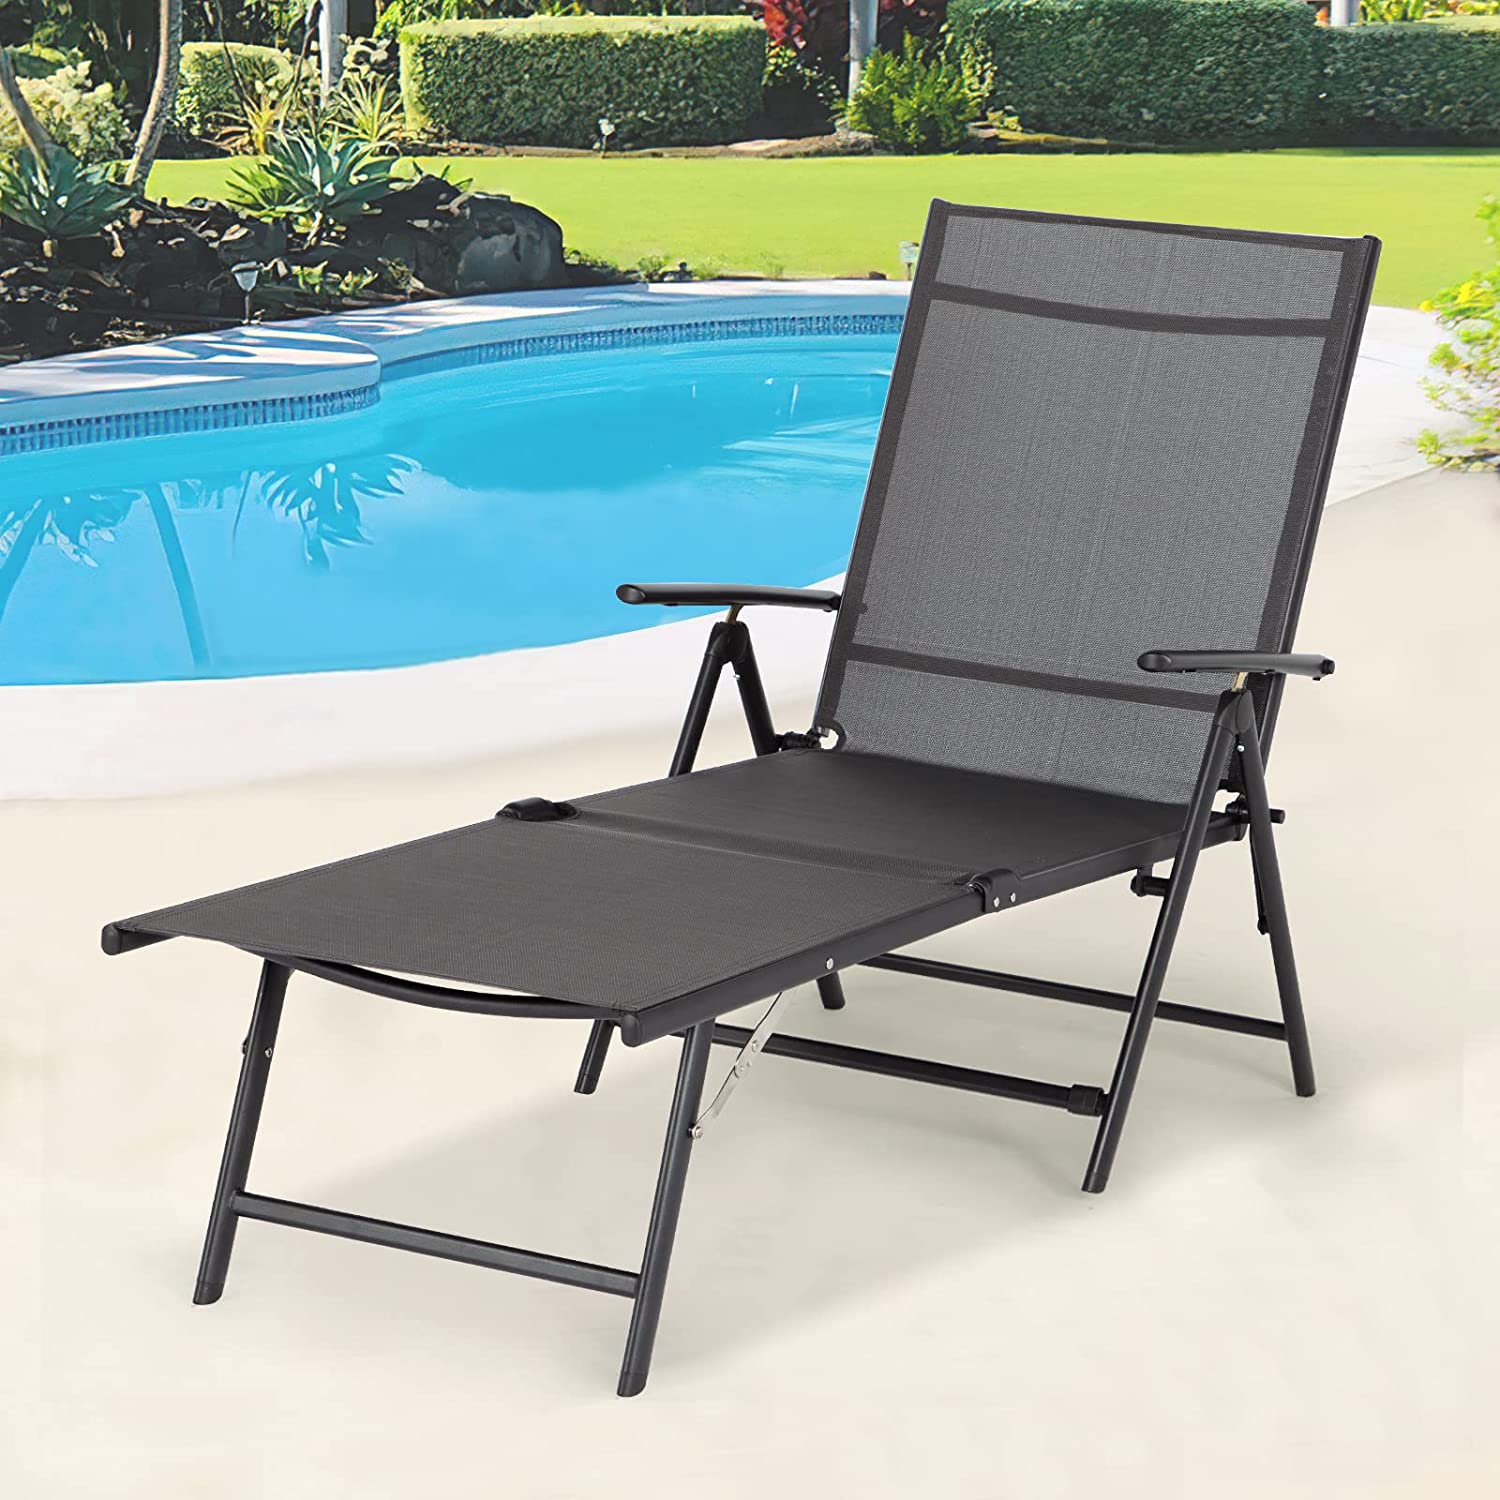 AECOJOY Outdoor Chaise Lounge Chair, Adjustable Textile Reclining Folding Pool Lounge, Gray - image 1 of 7